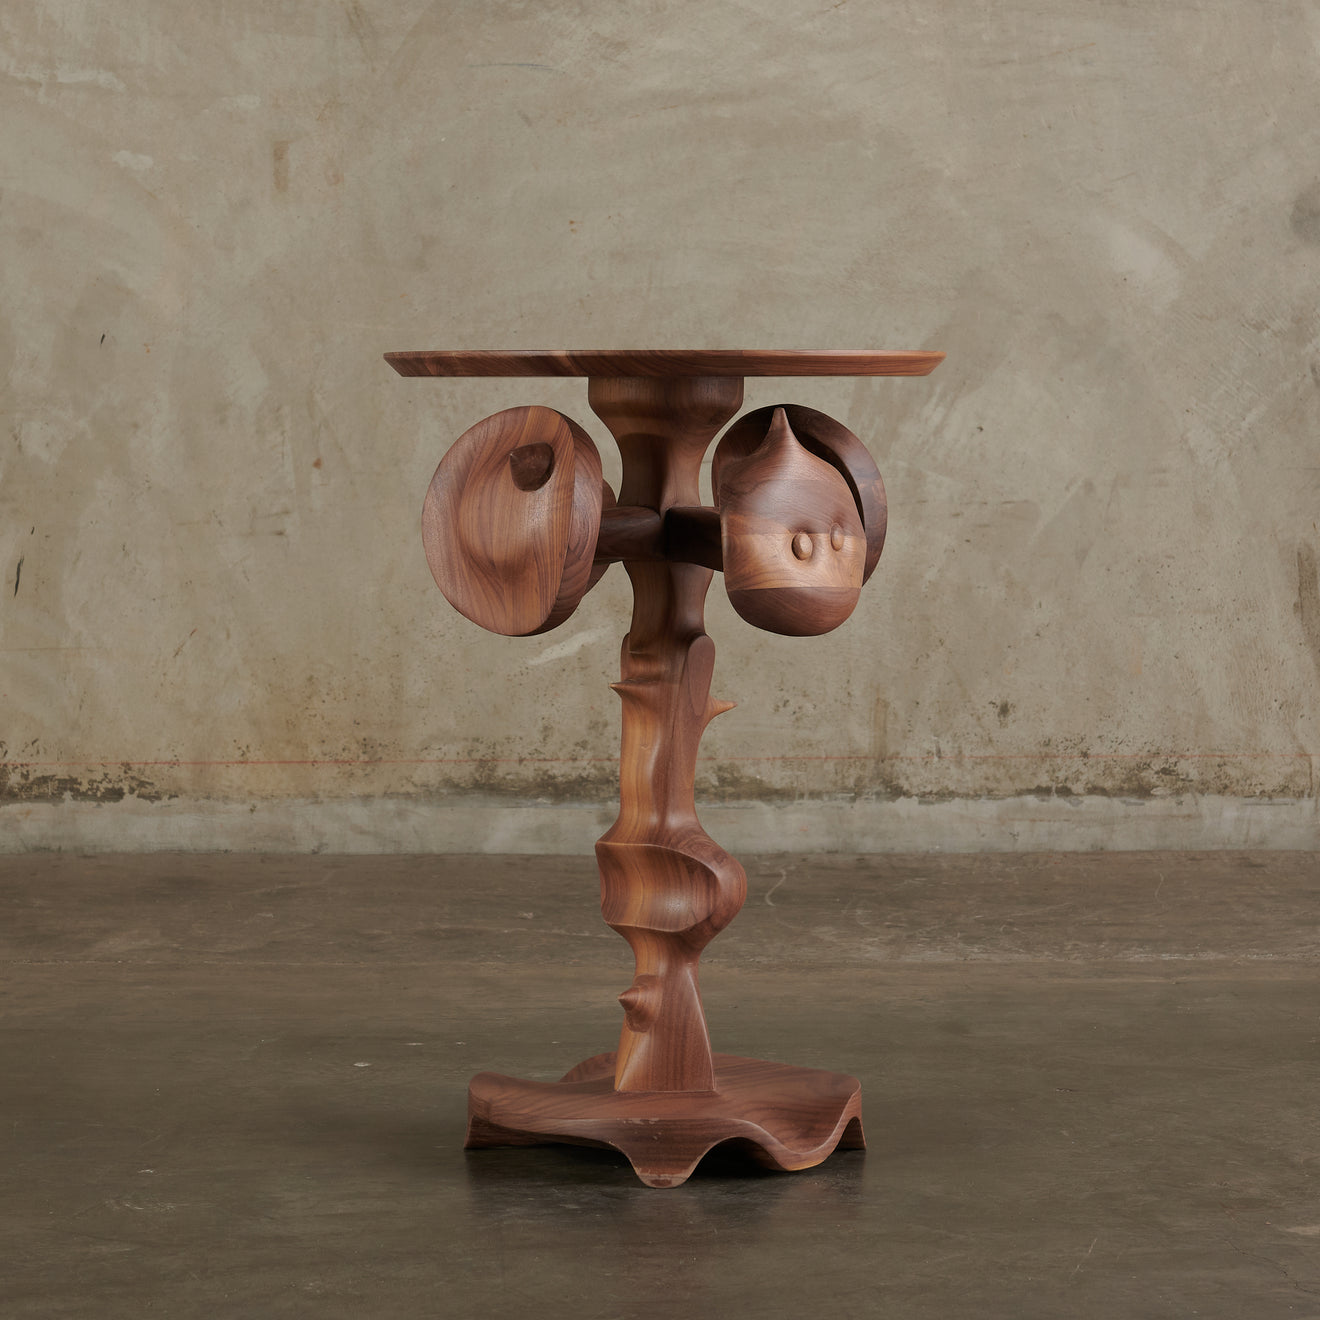 SIDE TABLE DESIGNED BY VICTOR ROMAN MANUFACTURED BY ATELIER(ER), style A